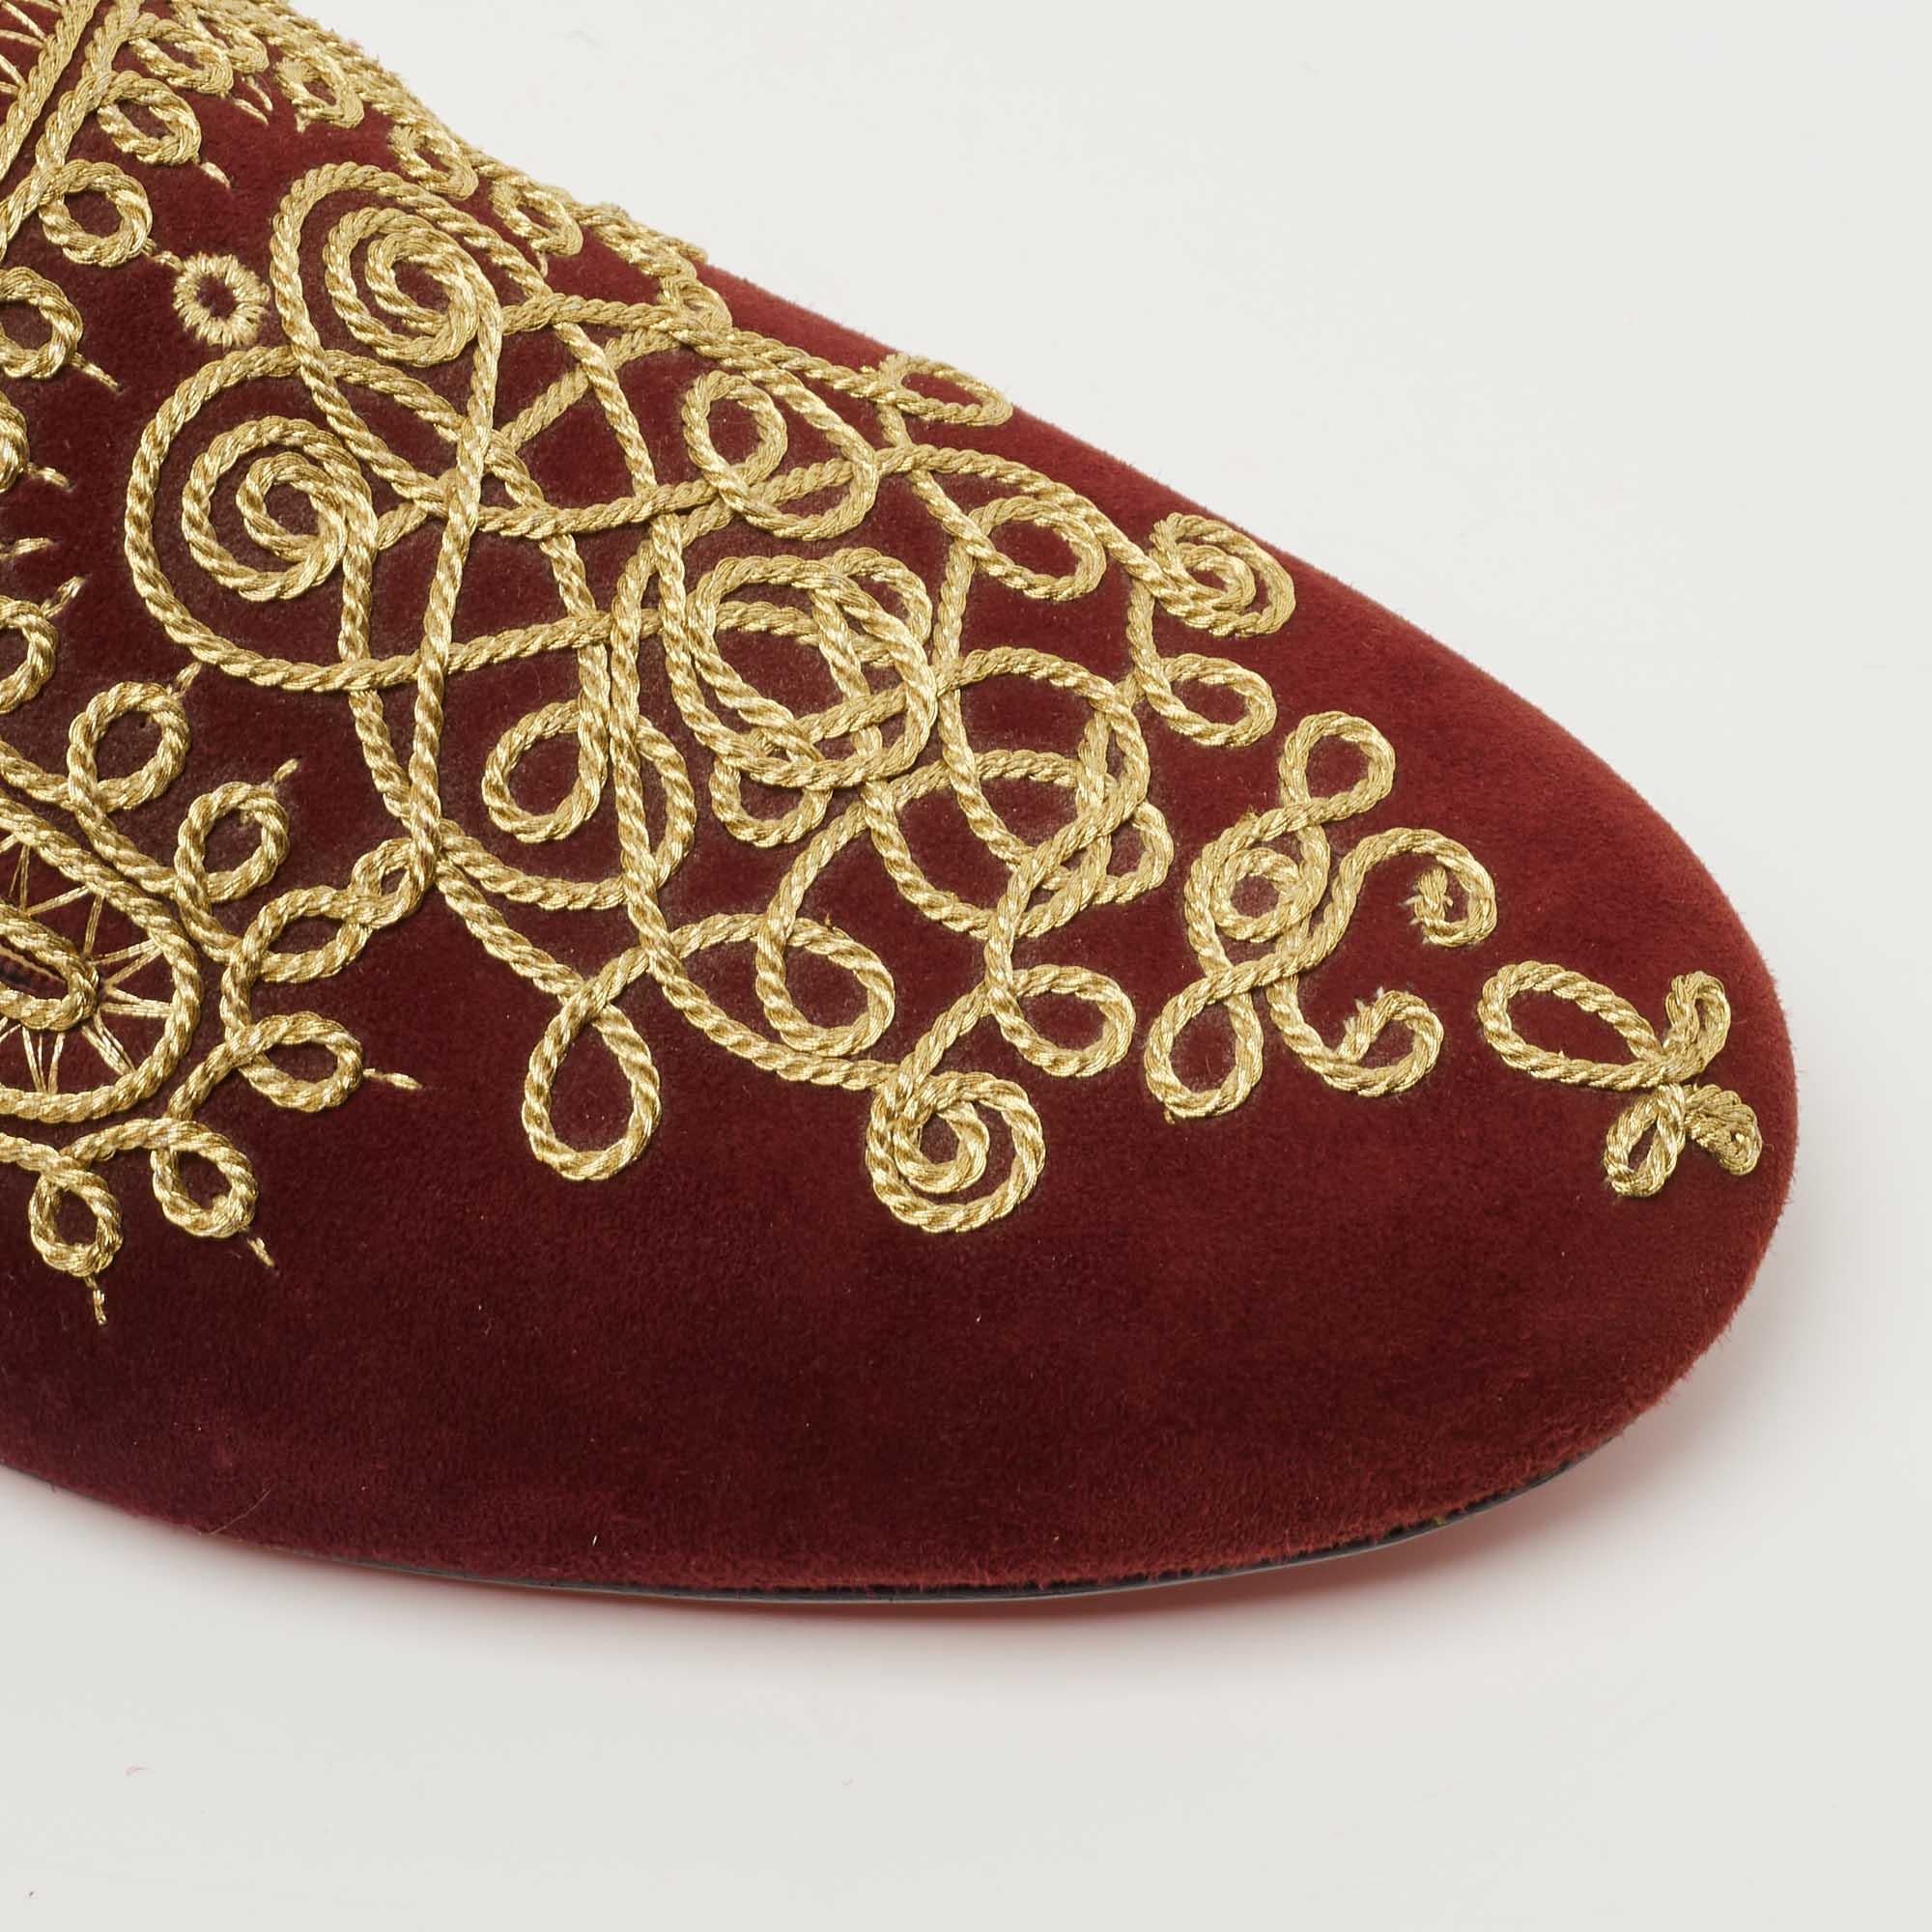 Christian Louboutin Burgundy Embroidered Mamounia Smoking Slippers Size 40.5 For Sale 1